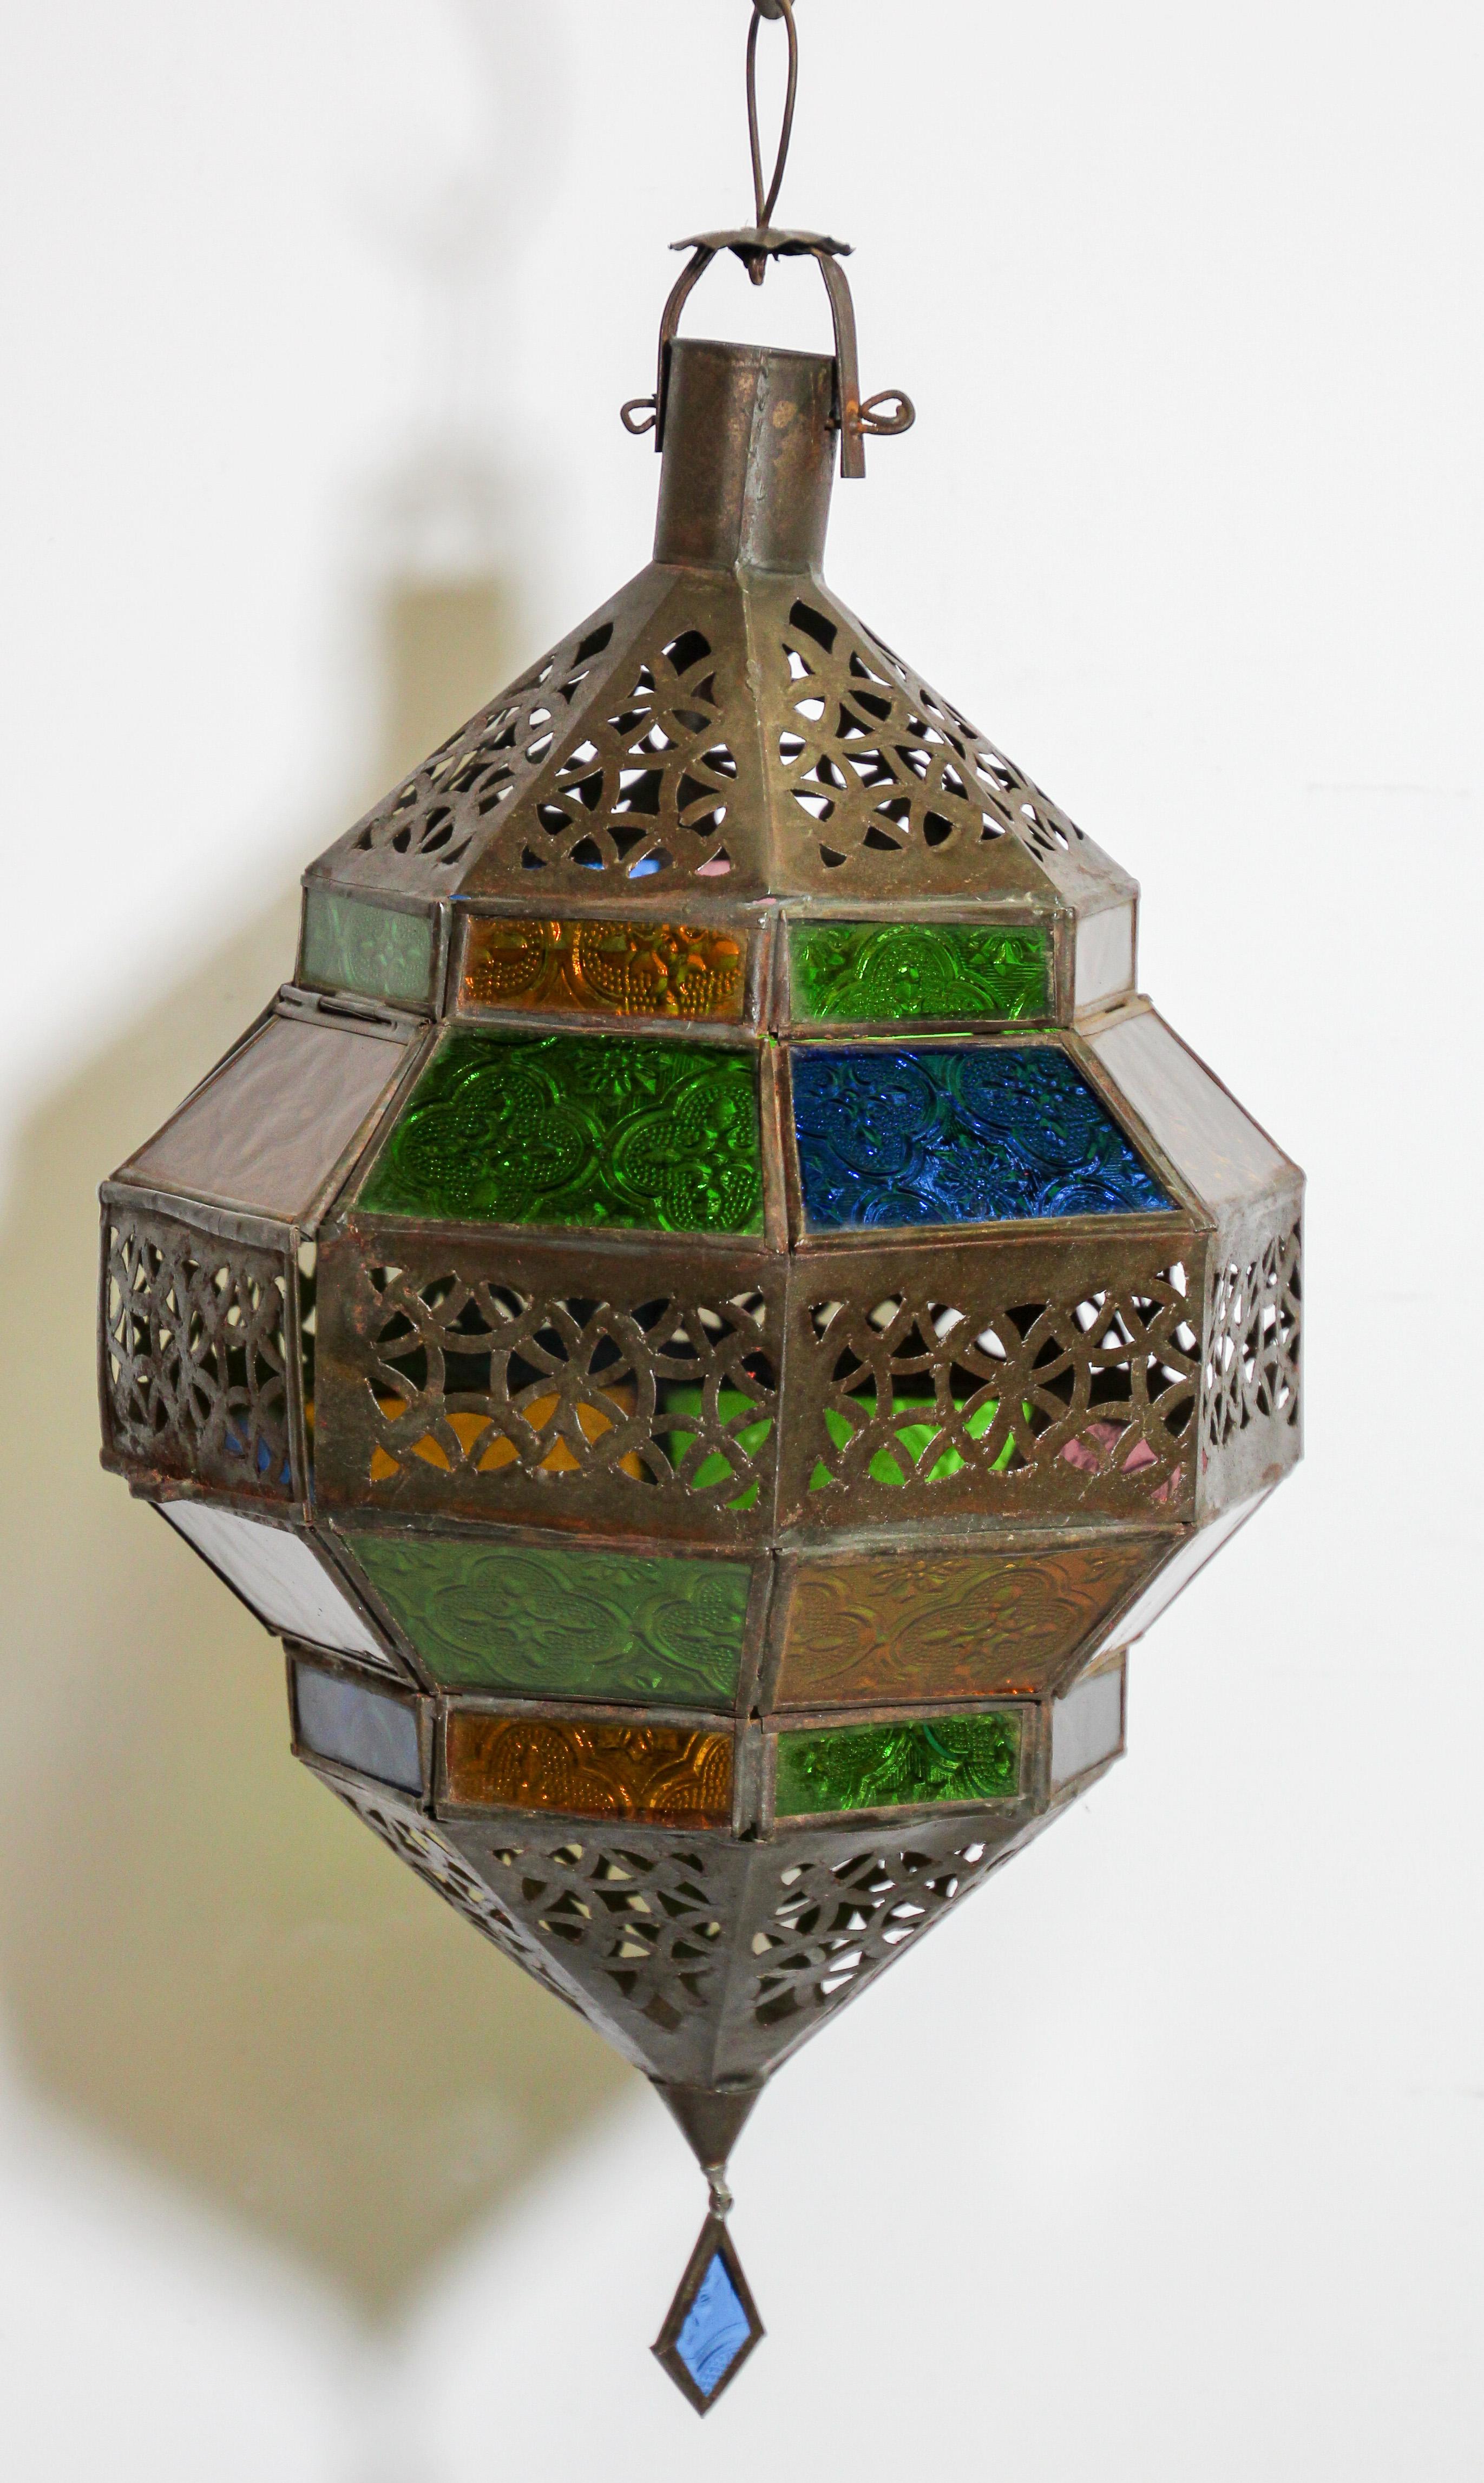 Moroccan metal and multi-color glass lantern, amber, green, lavender, blue glass lantern in diamond shape.
Moroccan lantern in octagonal shape with rust color metal finish and blue glass.
The top and bottom with open metal work Moorish design.
This